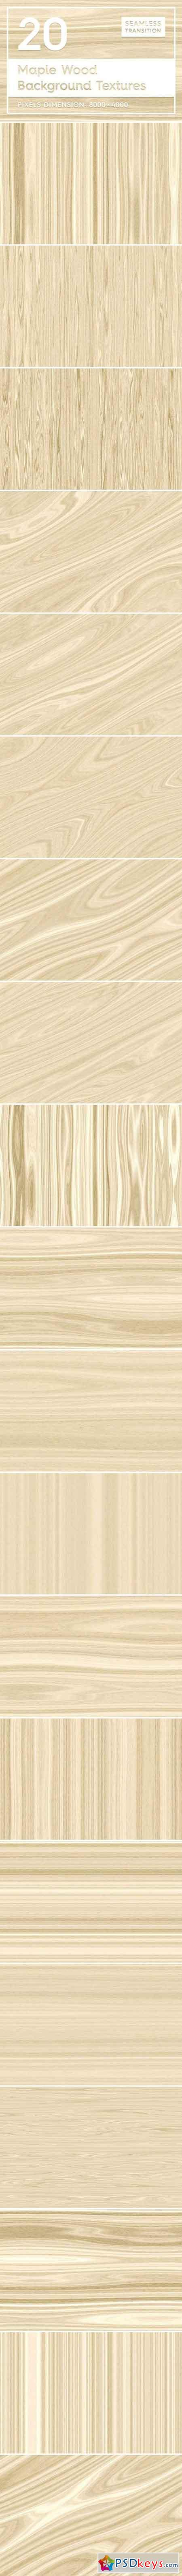 20 Maple Wood Background Textures 2167079